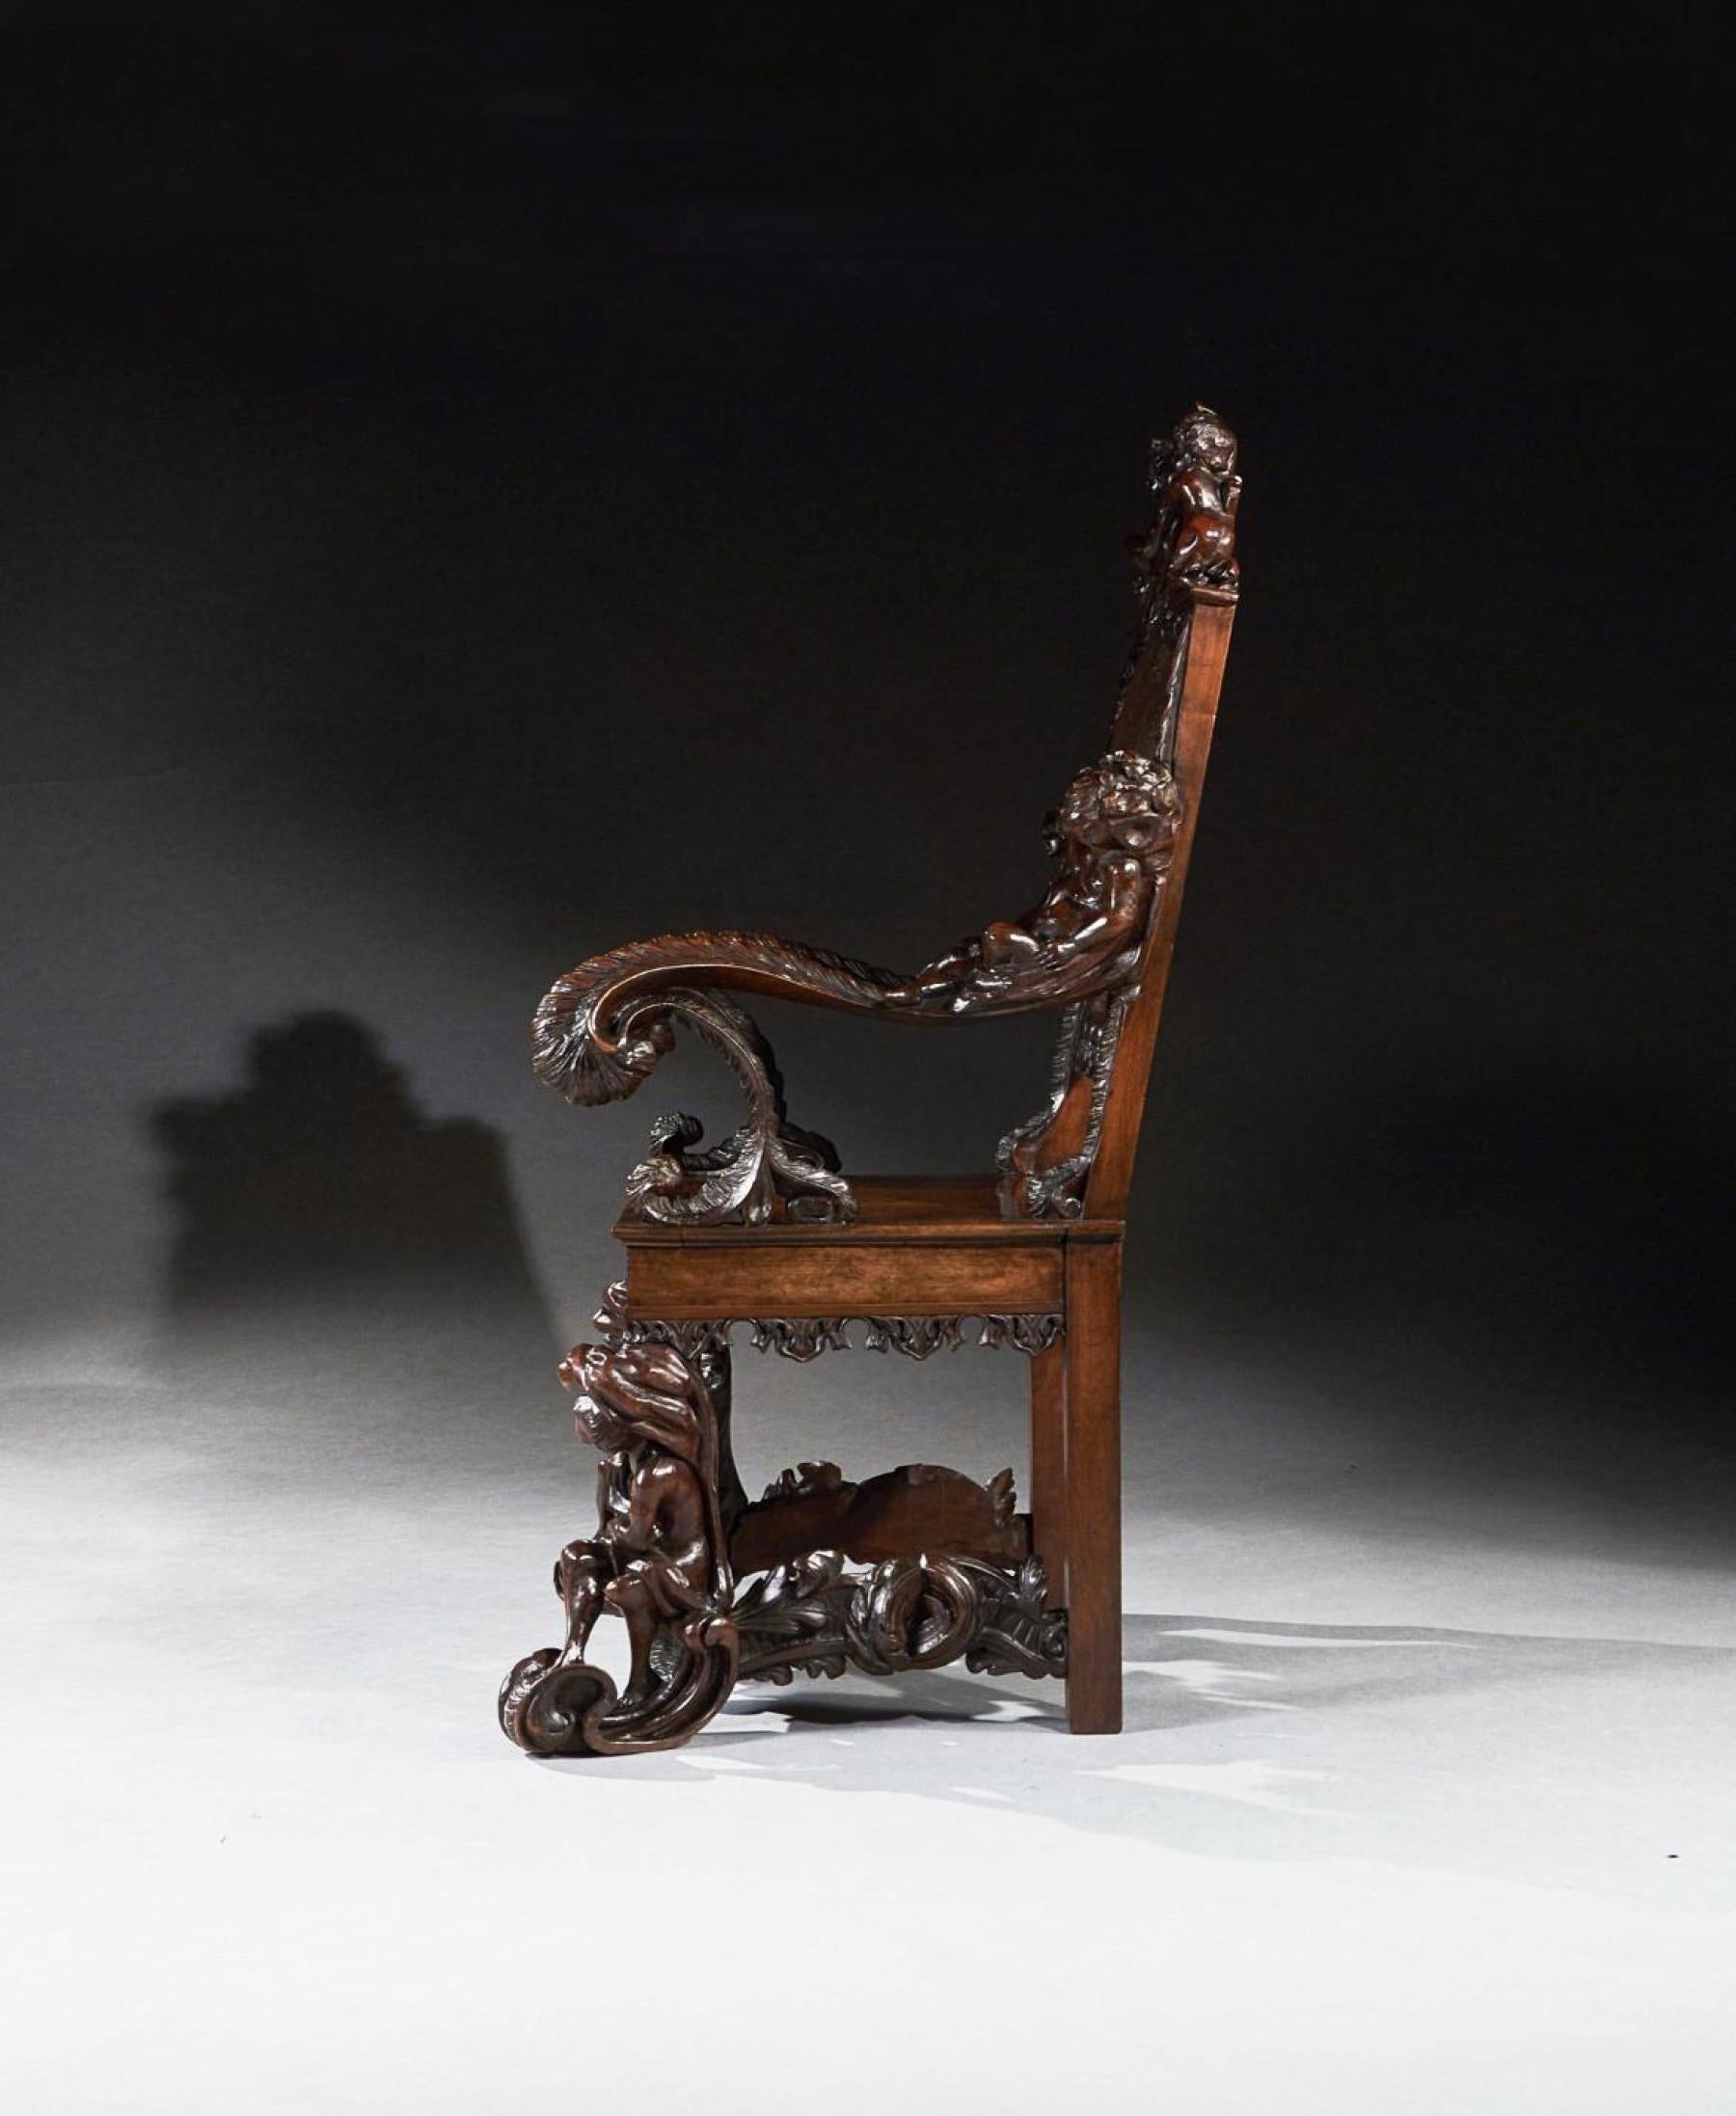 Exhibition Quality Italian 19th Century Carved Walnut Armchair After Andrea B In Good Condition For Sale In Benington, Herts